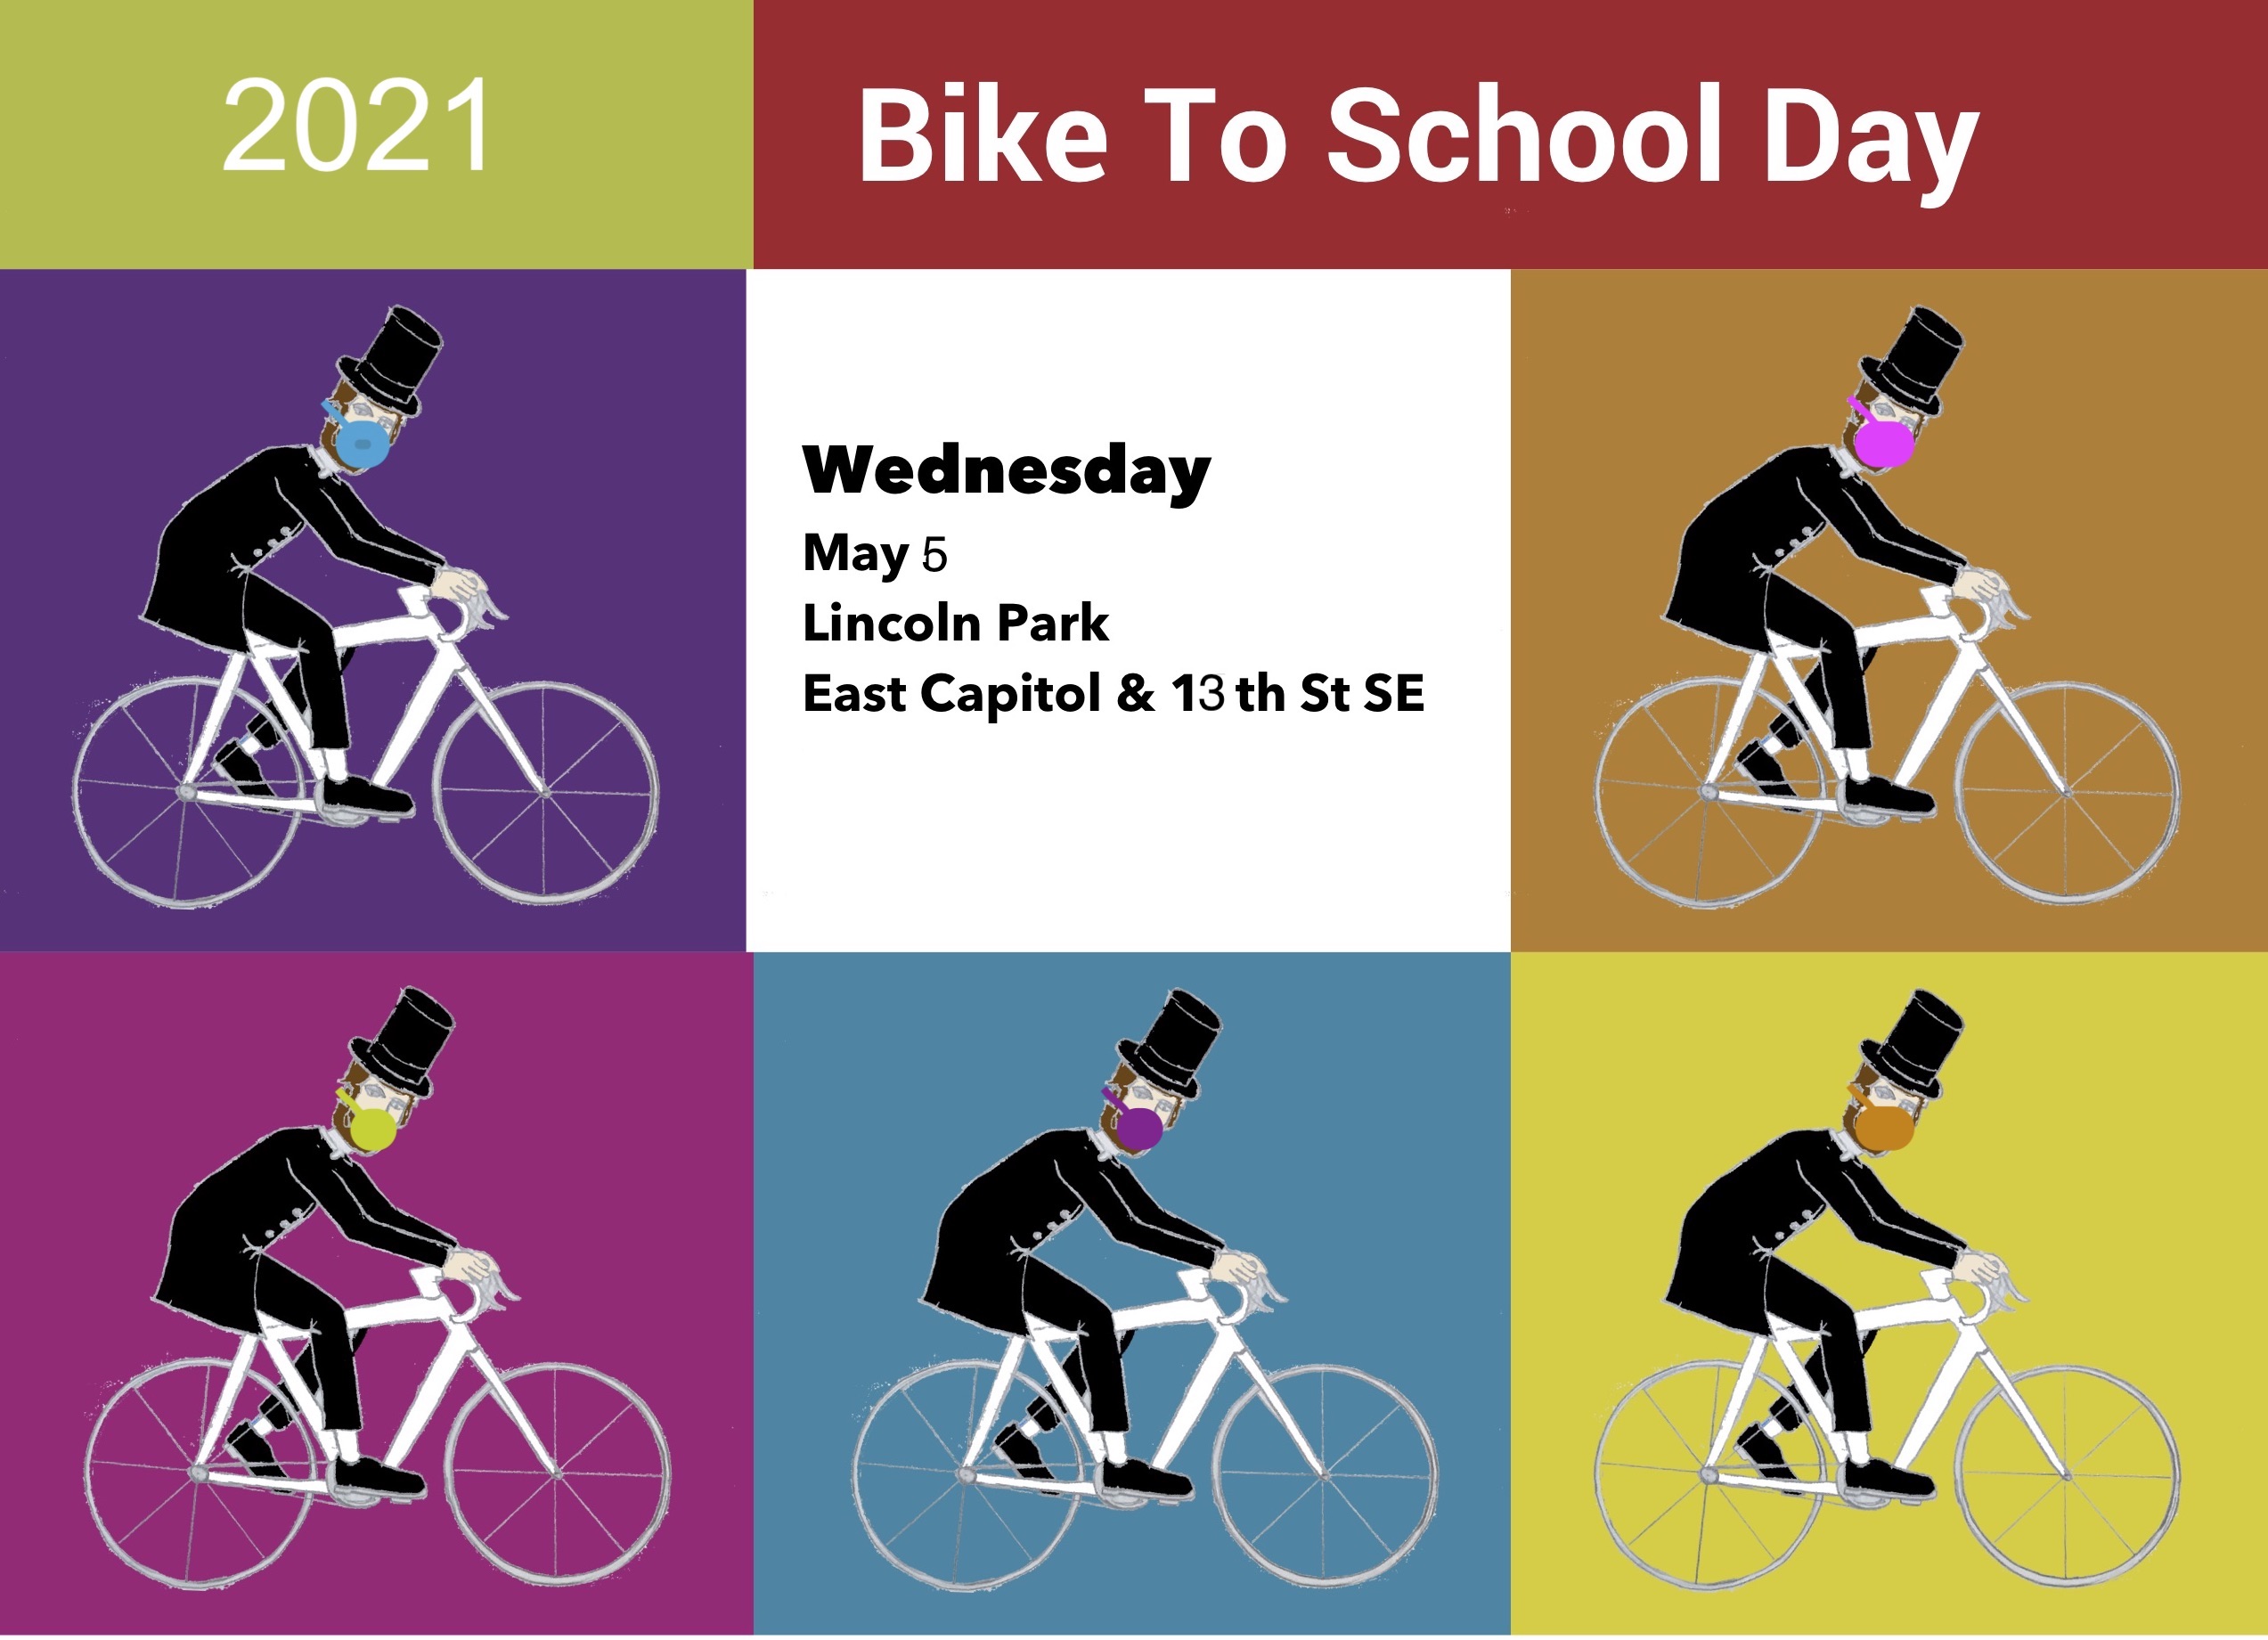 bike-to-school-day-is-may-5-2021-at-lincoln-park-register-save-the